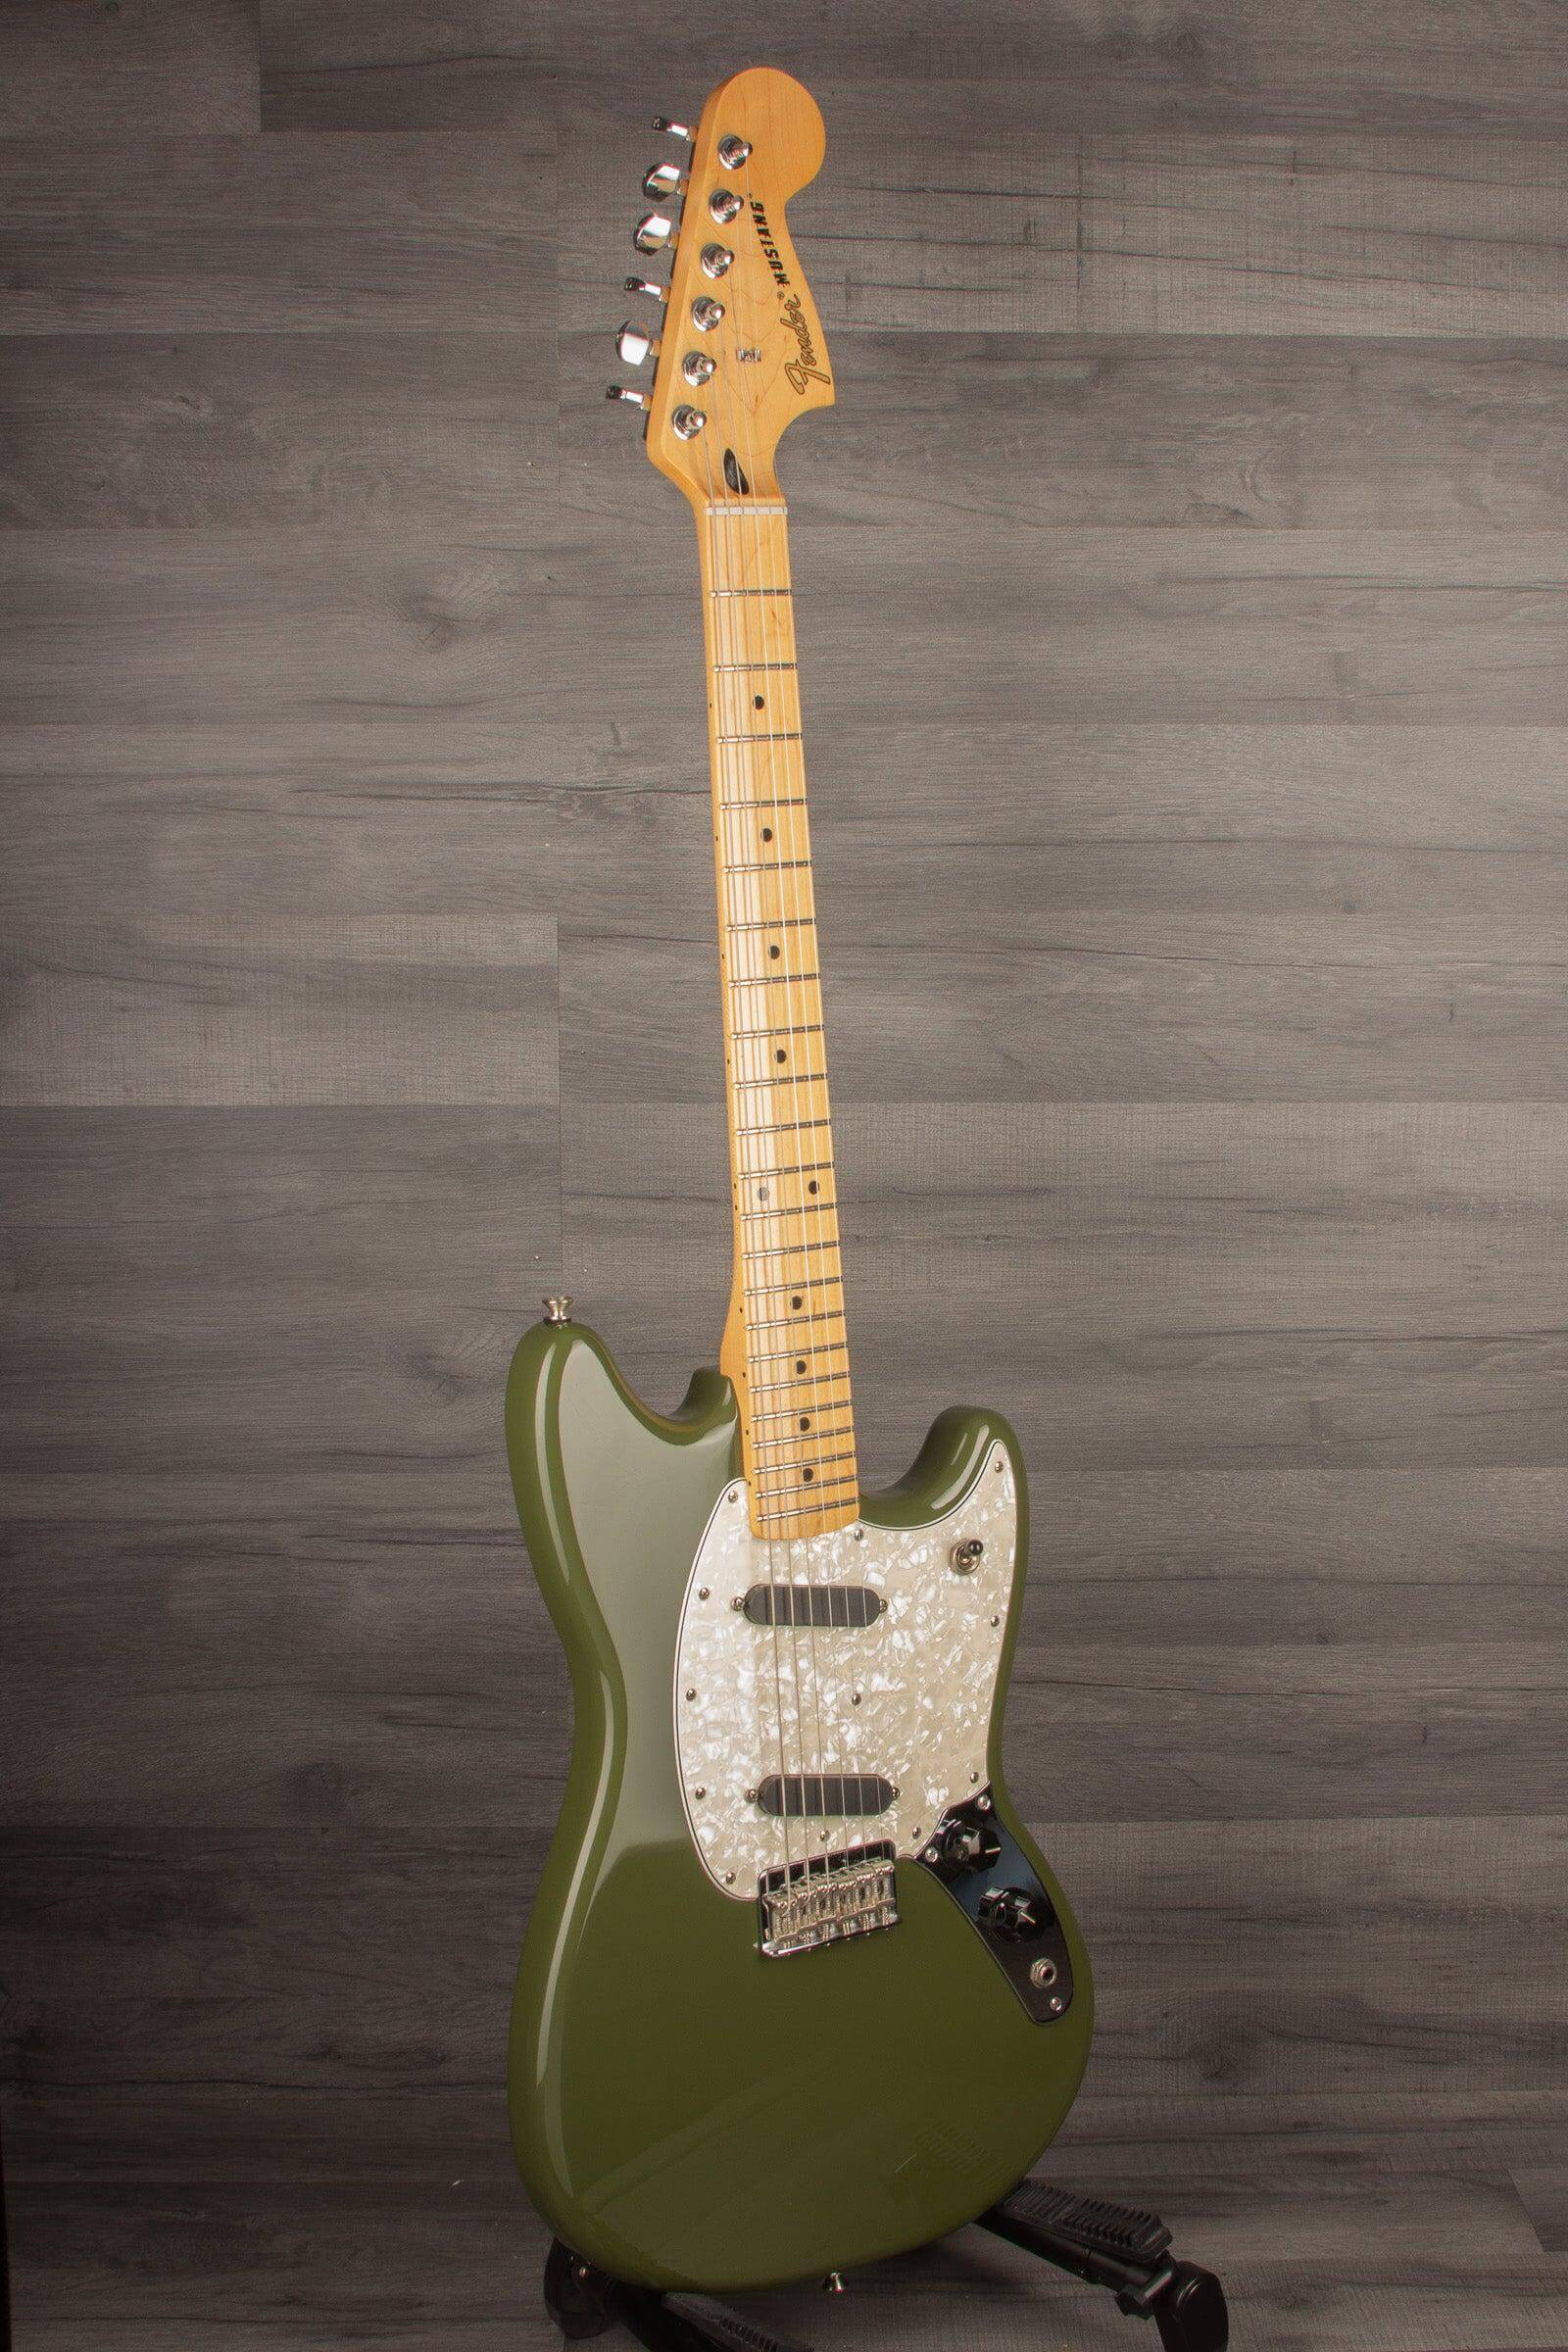 USED - Fender Mustang Olive Green - MusicStreet